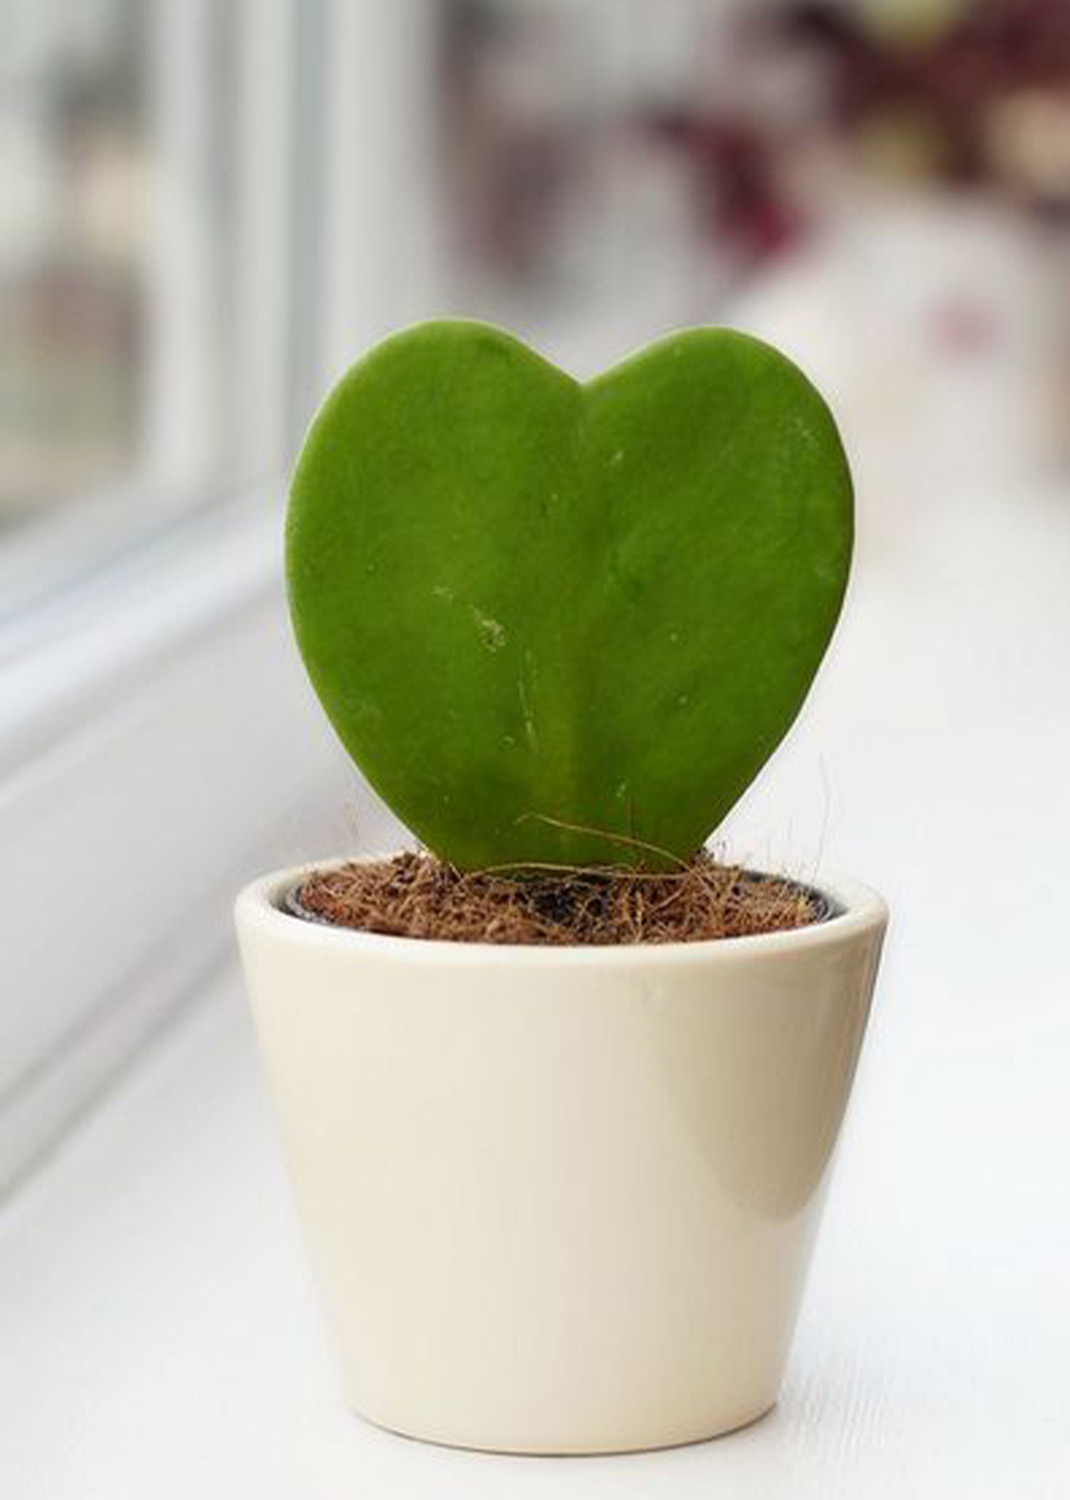 Lucky Hart Plant with Ceramic Pot 